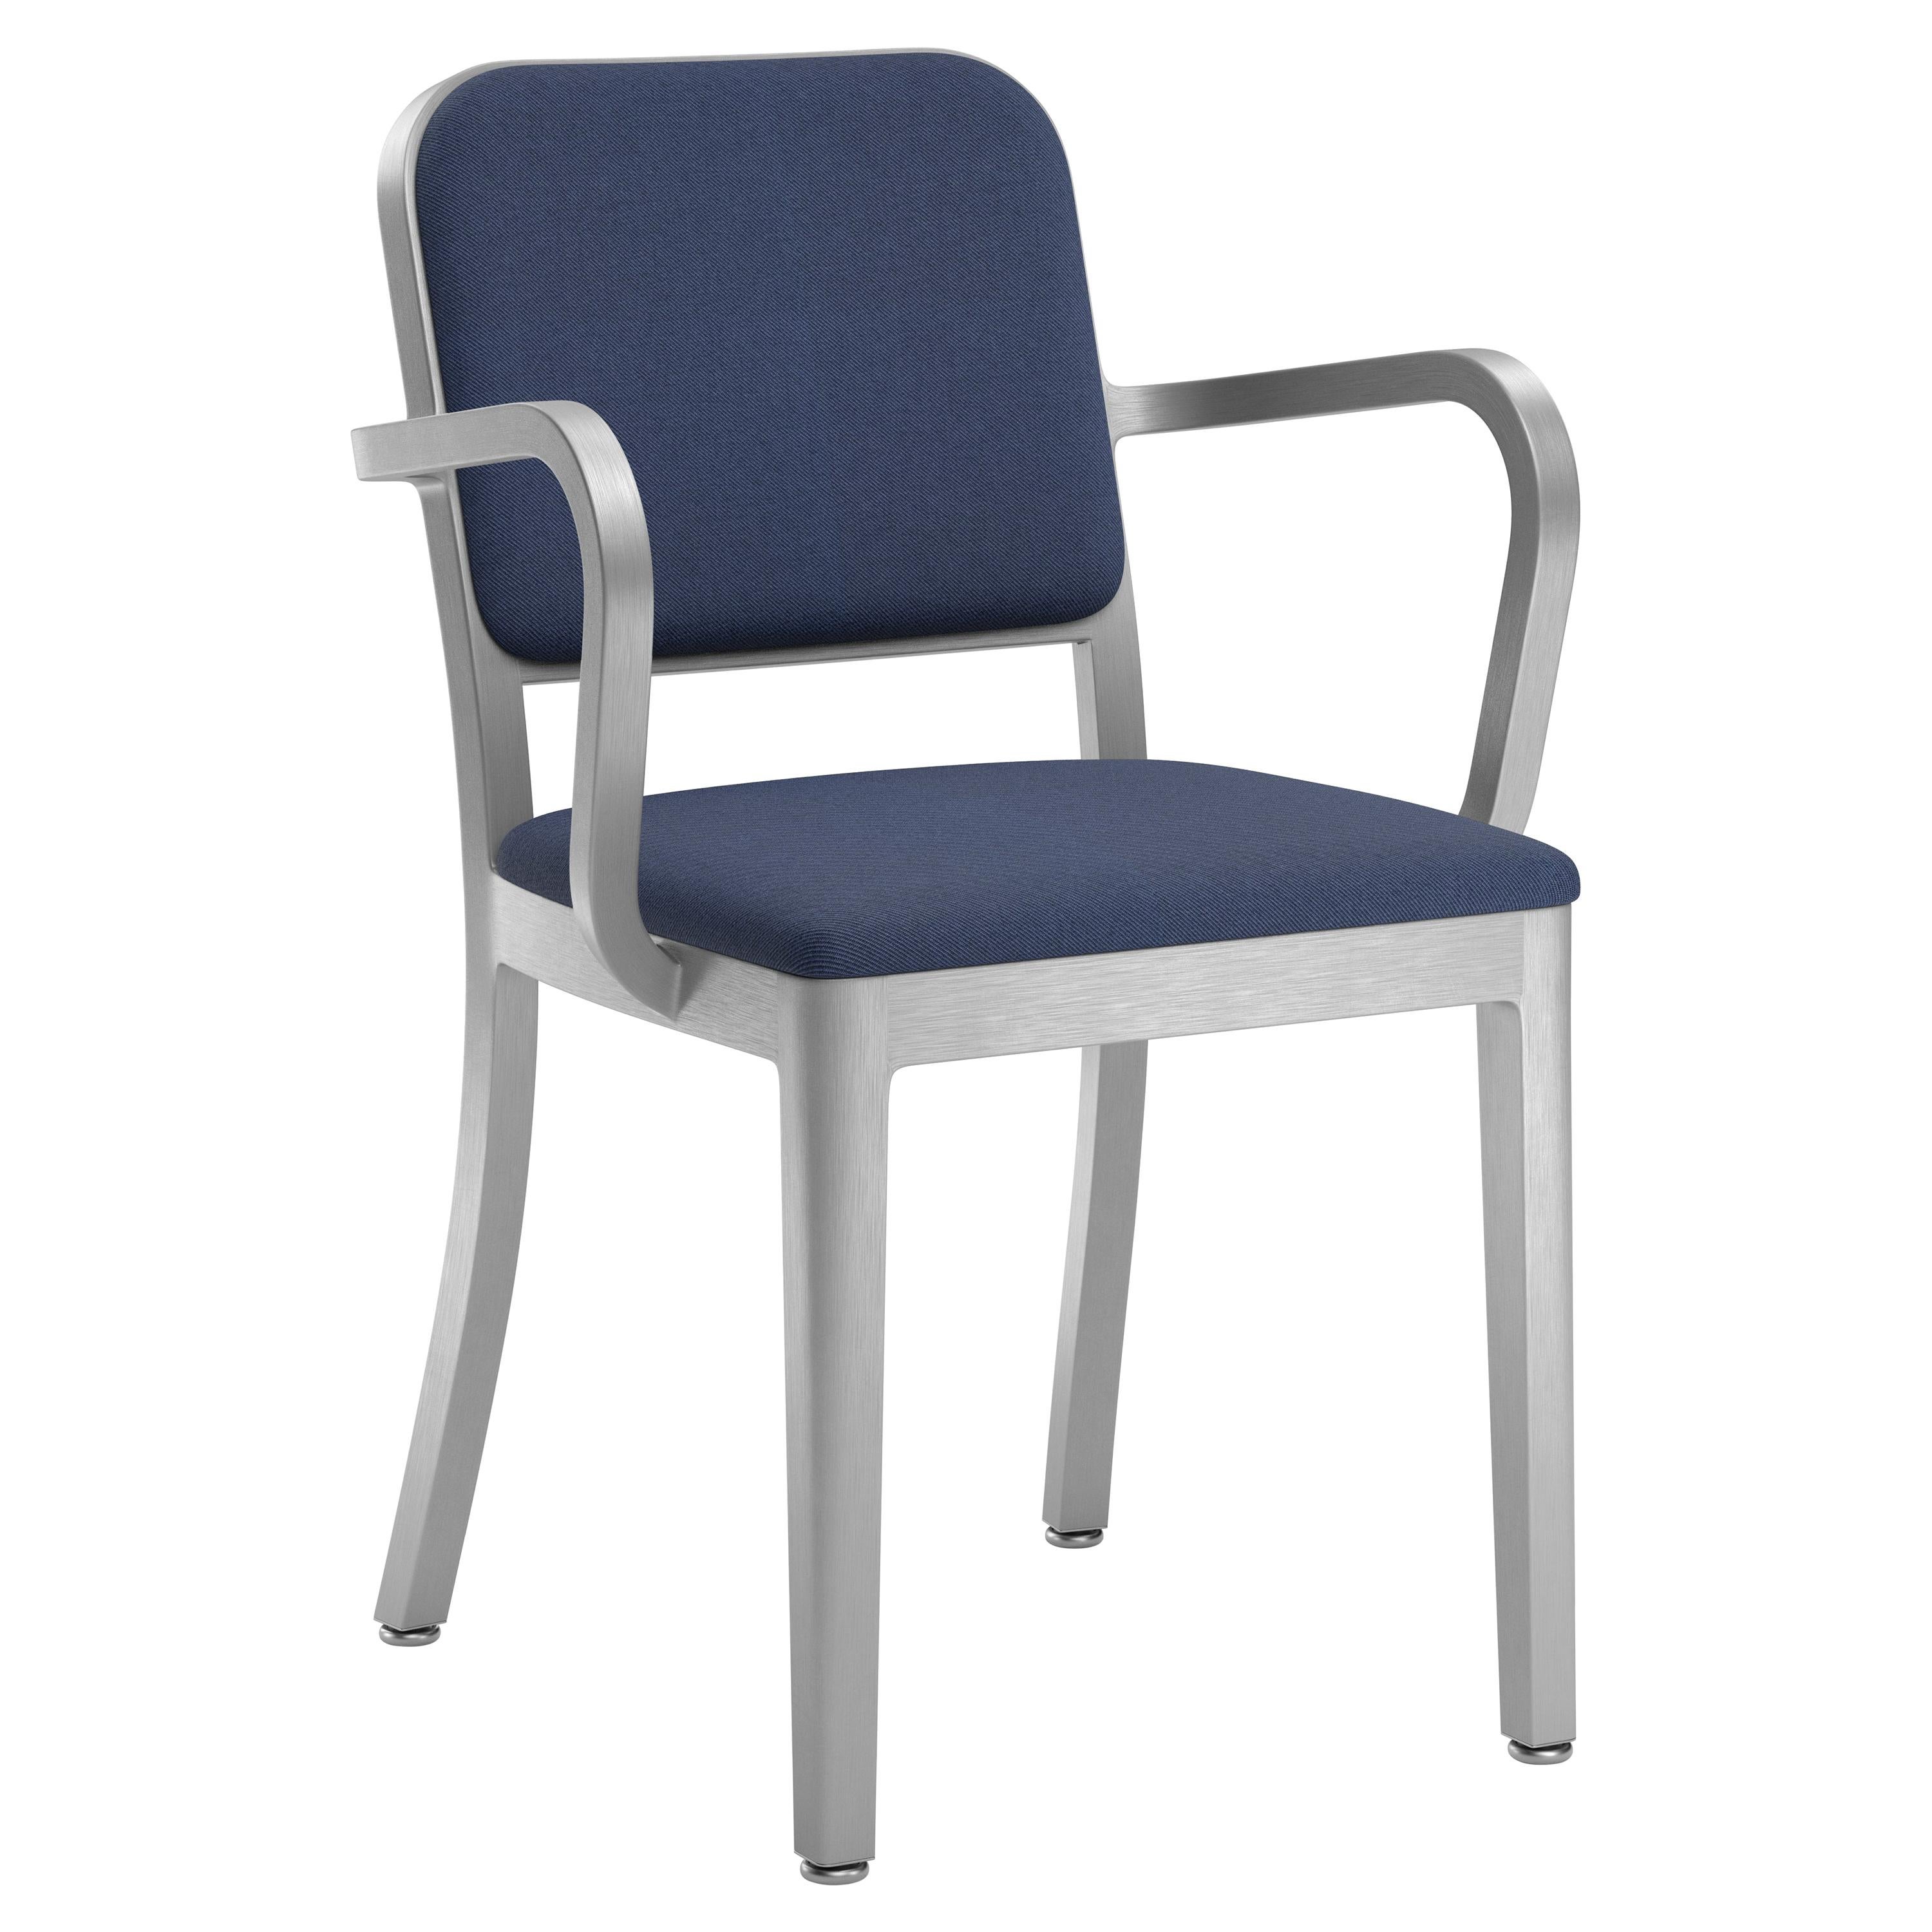 Emeco Navy Officer Armchair in Navy Blue Fabric with Aluminum Frame For Sale